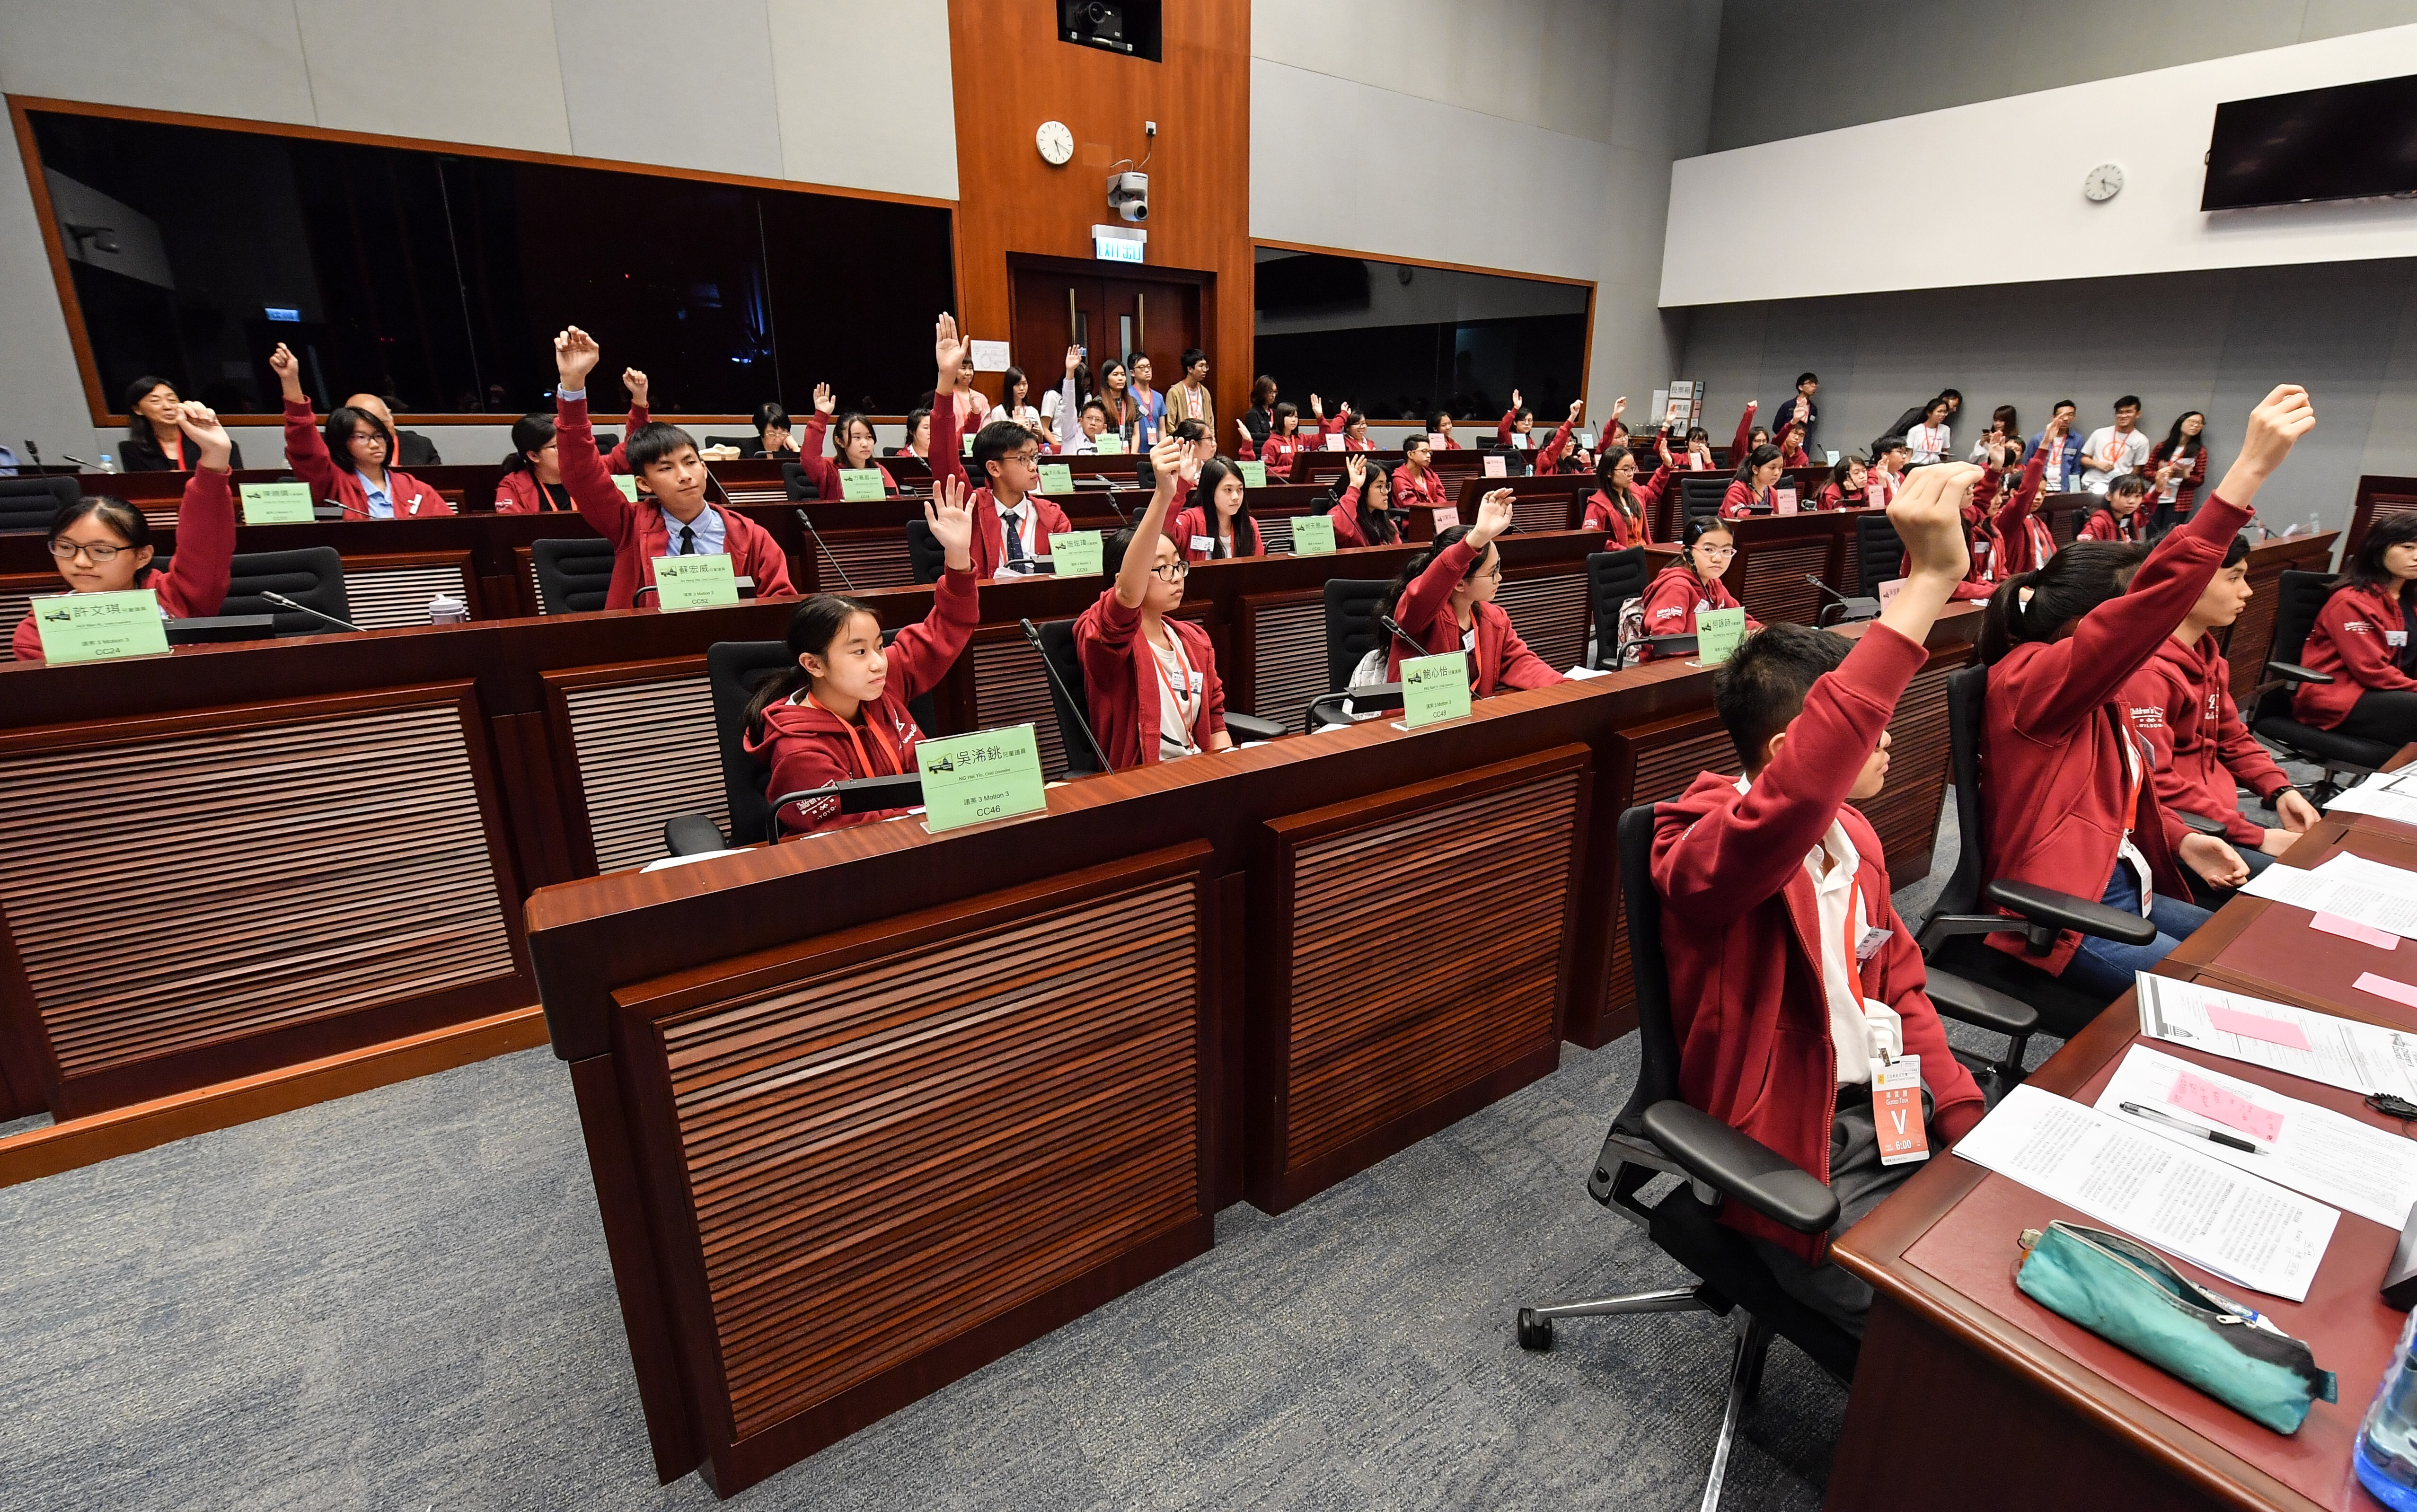 Fifty-one young councillors gathered at Legco to discuss proposed policies on youth-related issues. Photo: Children’s Council 2018